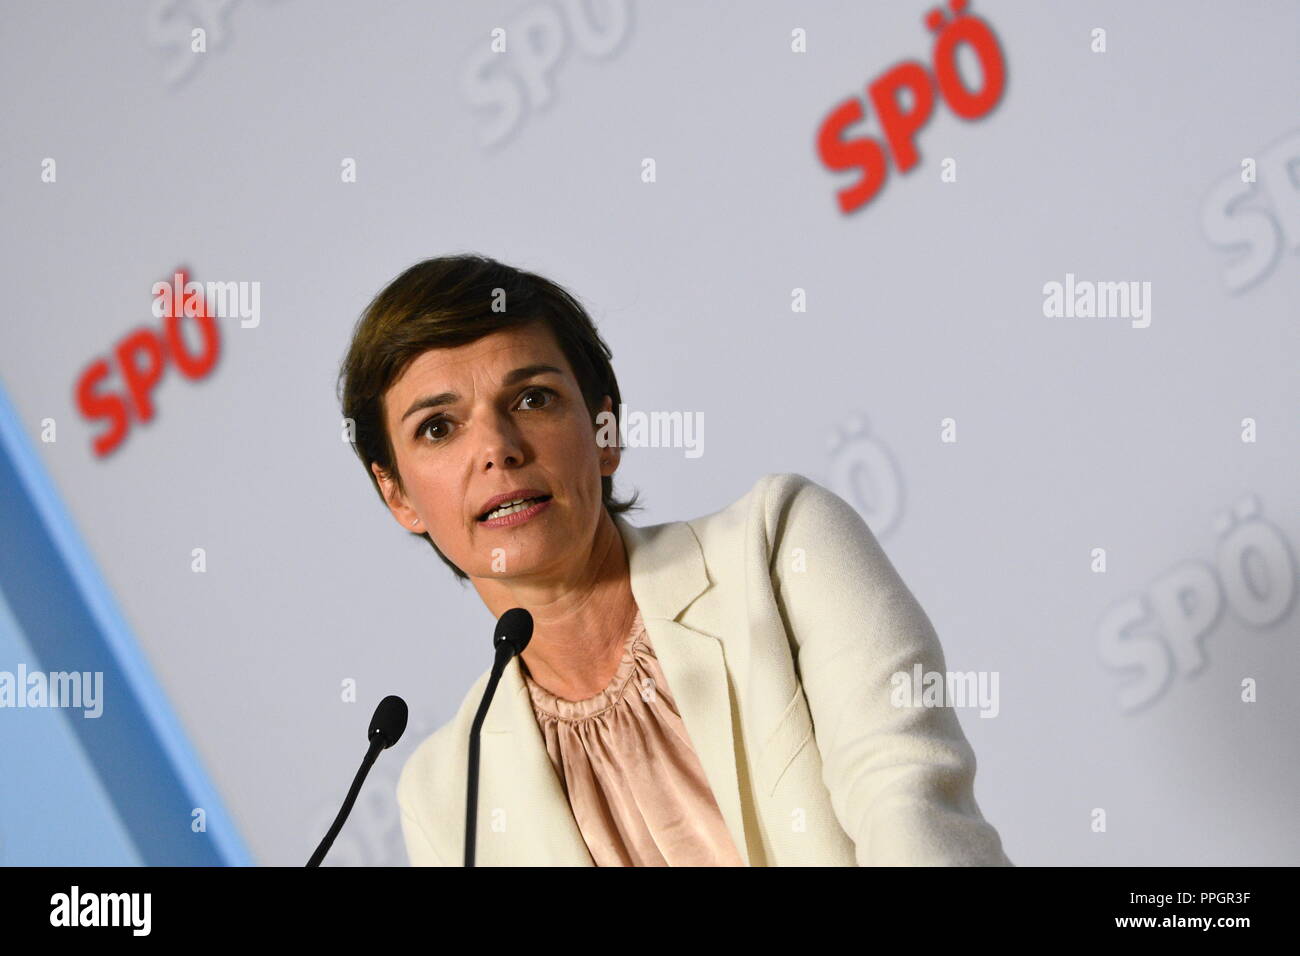 Vienna, Austria. 25.September 2018.First press statement of the new federal party chairman of the SPÖ (Social Democratic Party of Austria) Pamela Rendi-Wagner. Credit: Franz Perc / Alamy Live News Stock Photo